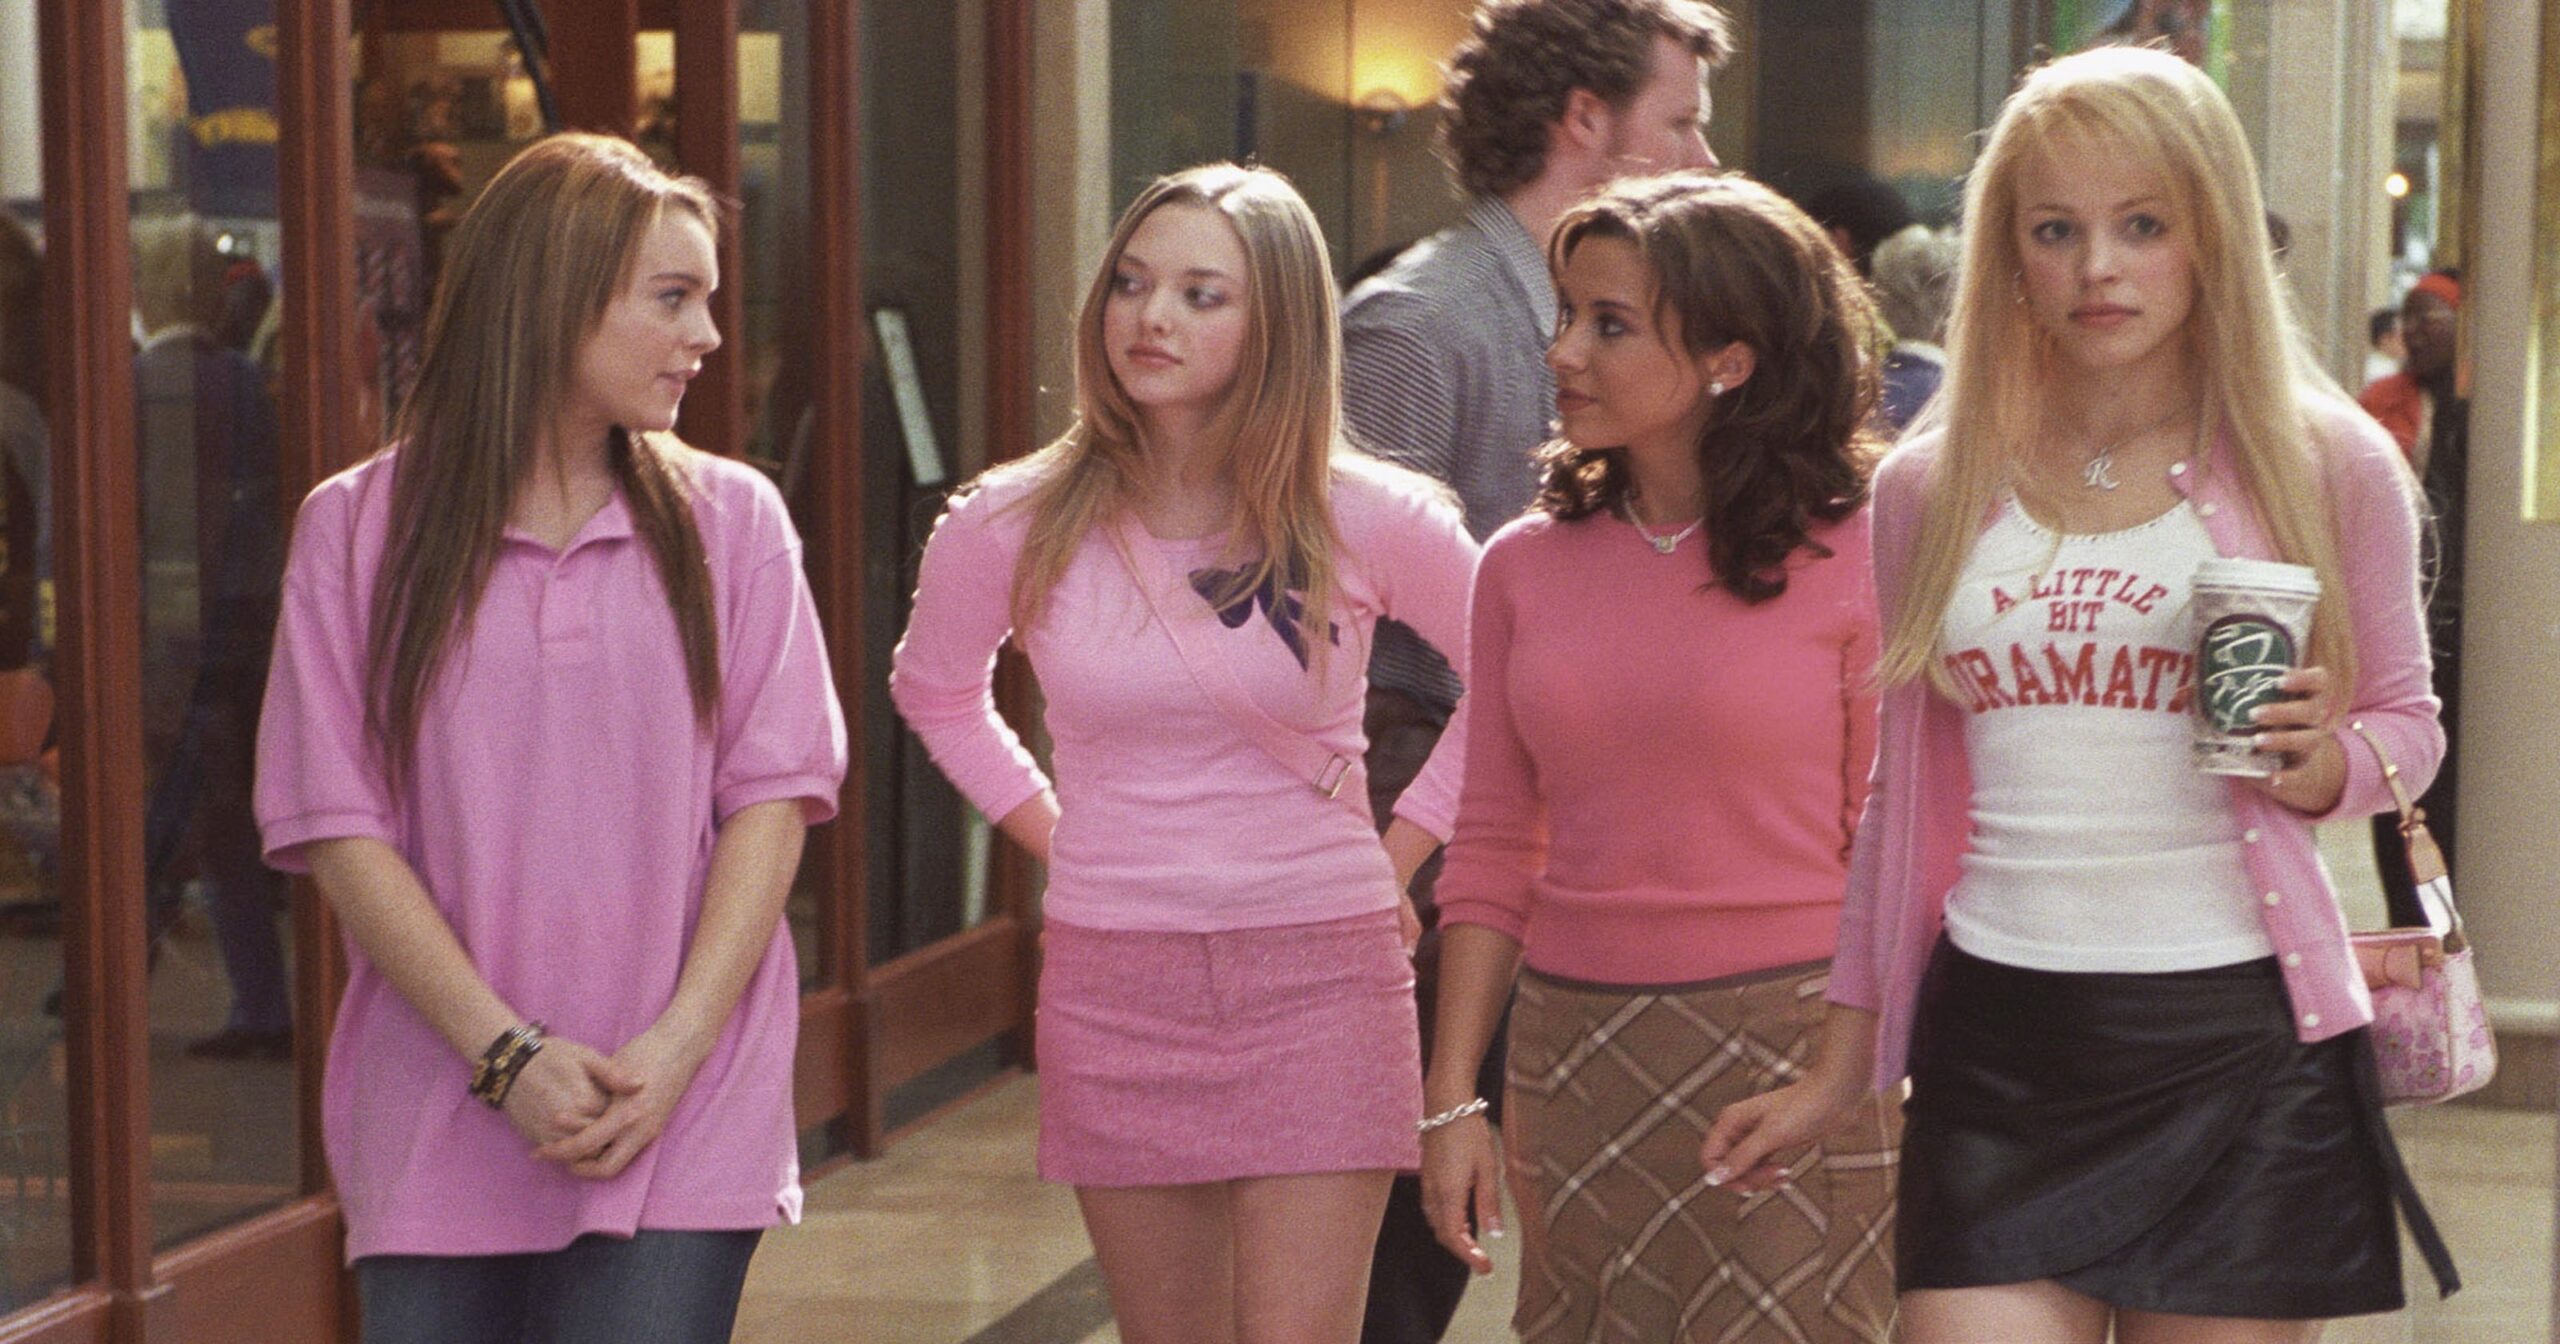 'Mean Girls' Appreciation Day: On October 3 here are 10 grool quotes